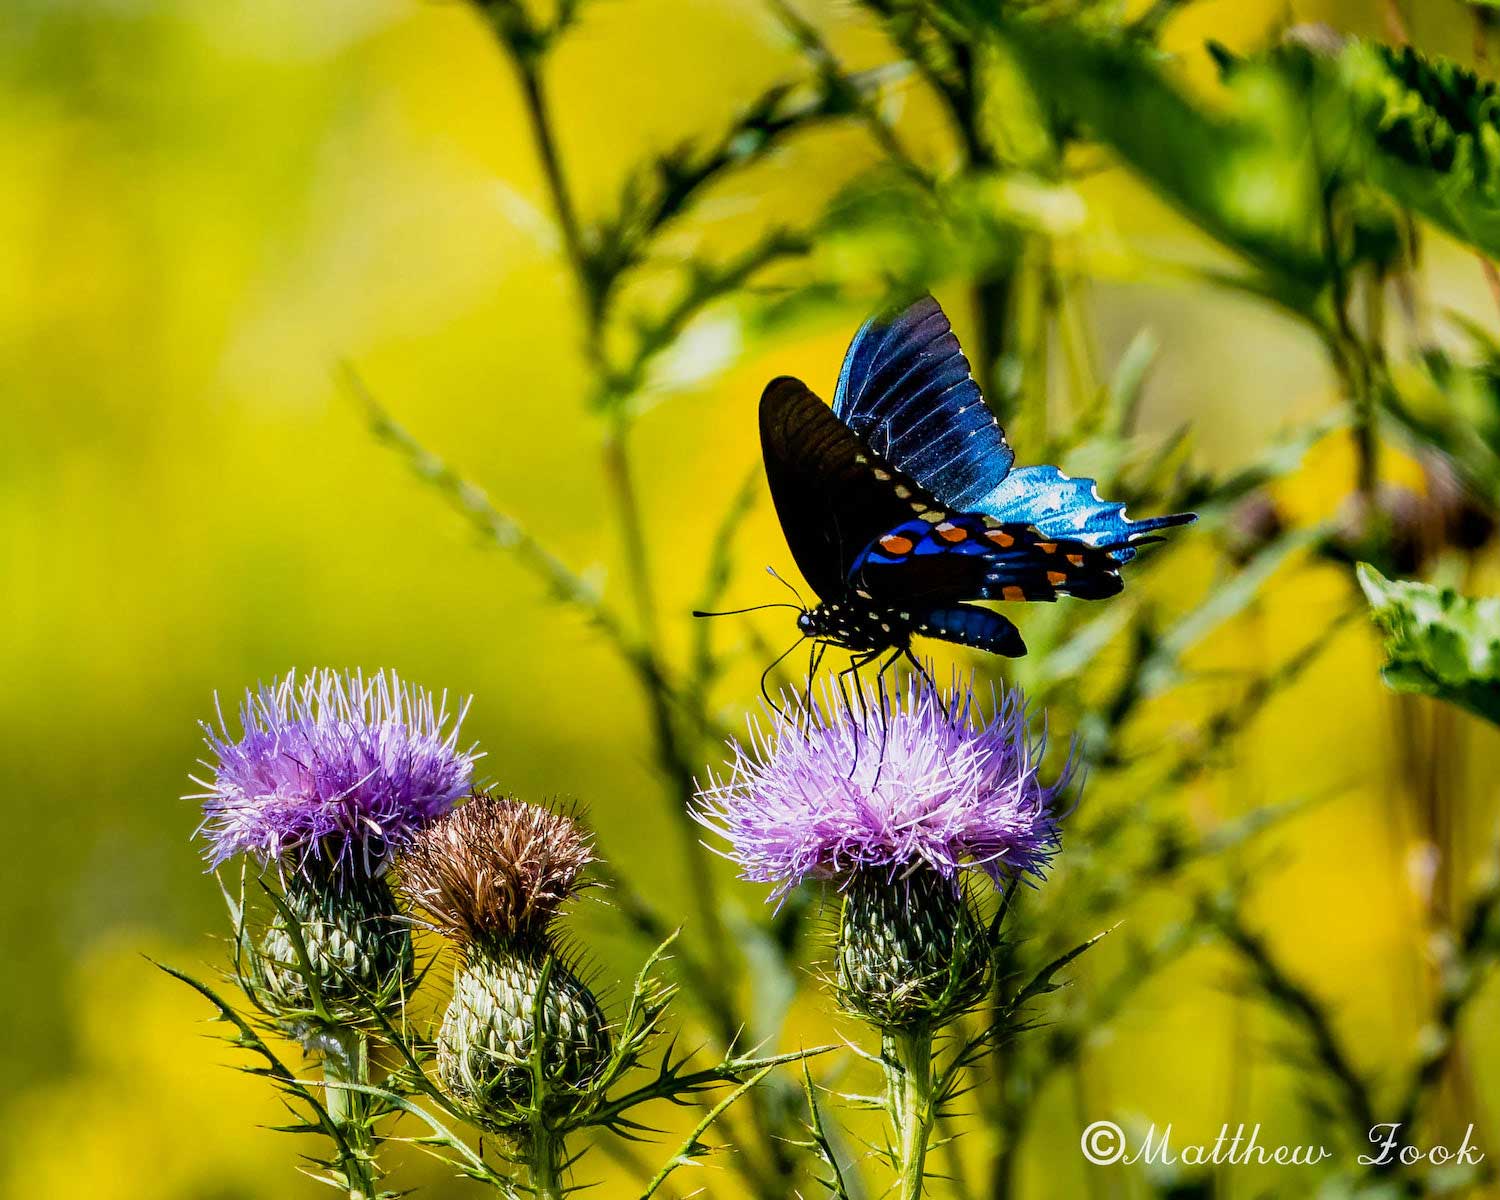 A pipevine swallowtail butterfly perched atop a purple thistle bloom.